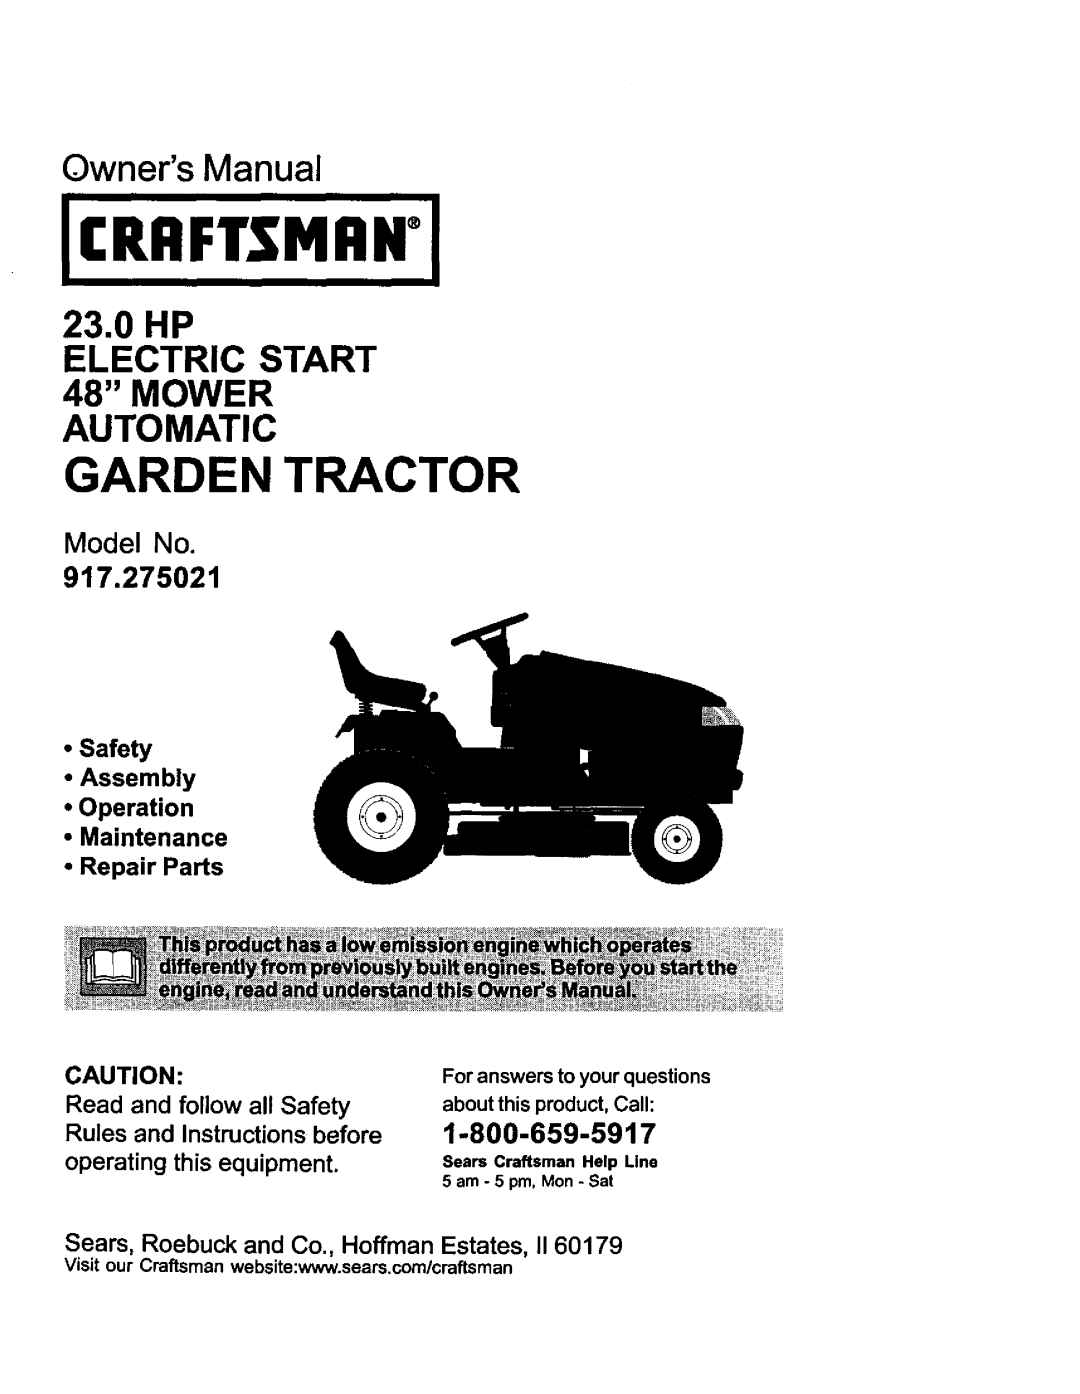 Craftsman 917.275021 manual Owners Manual, ELECTRIC START 48 MOWER, •Safety •Assembly •Operation •Maintenance, Read, Rules 